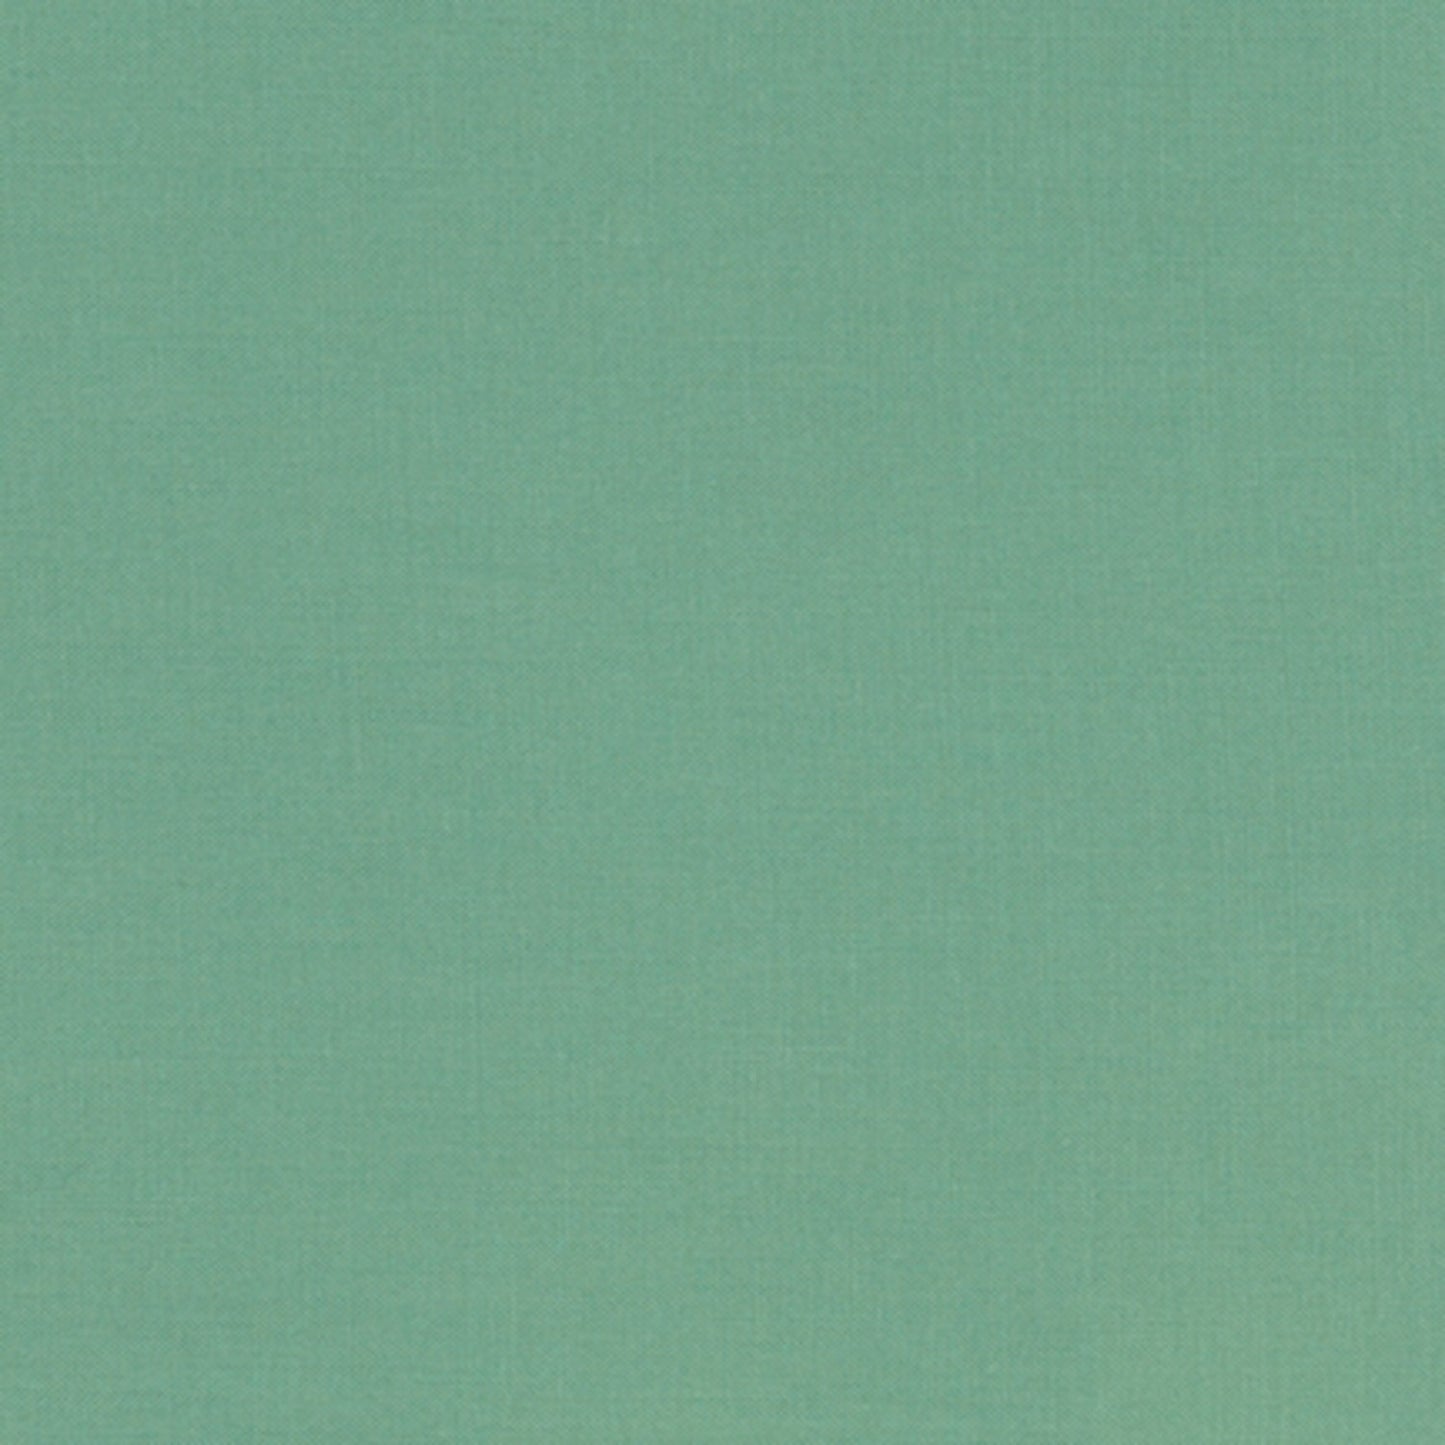 Kona Solids || Old Green || Cotton Quilting Fabric